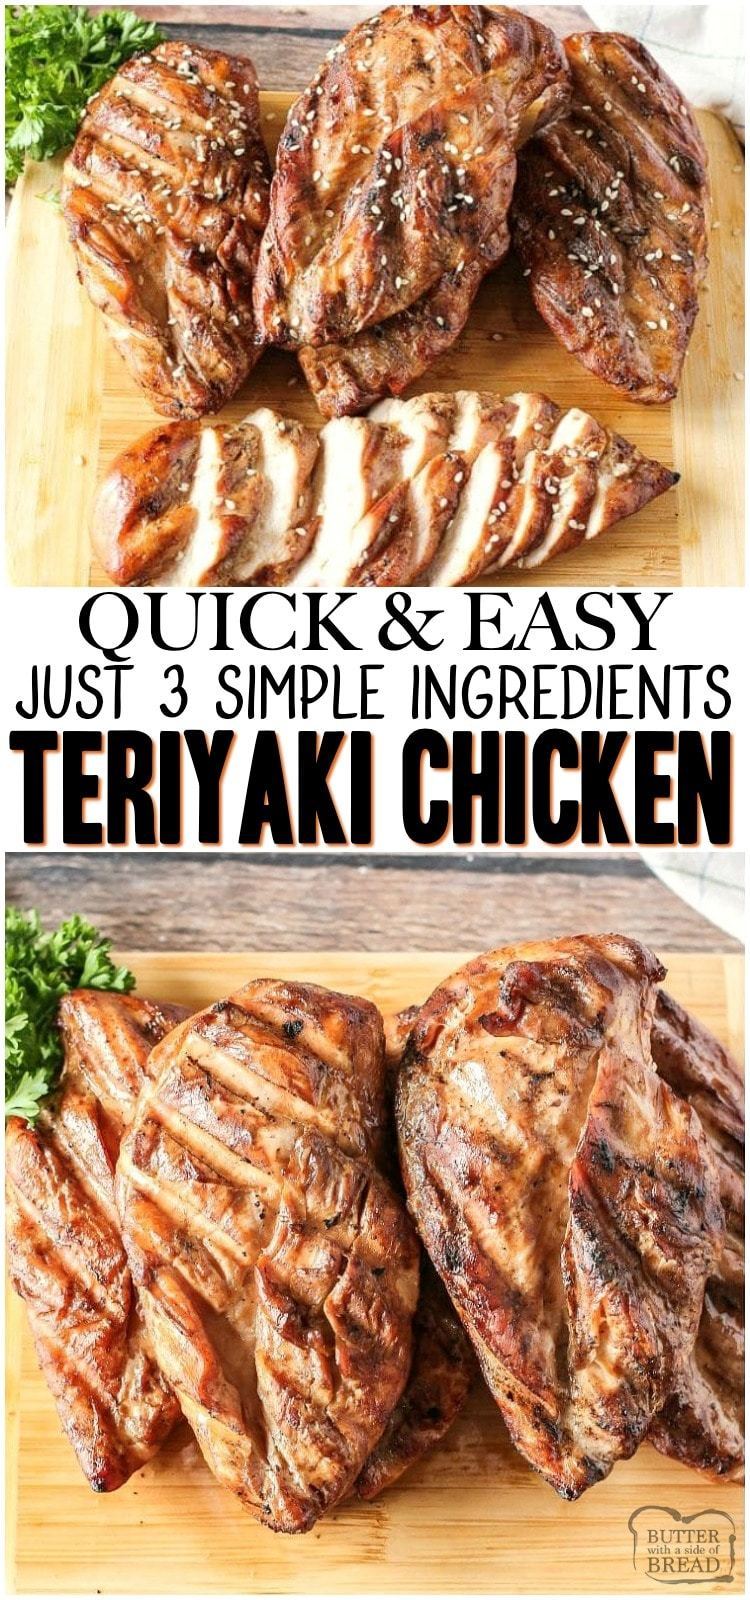 Easy Grilled Teriyaki Chicken recipe has just 3 ingredients and makes juicy, tender and flavorful chicken every time! Chicken Teriyaki recipe perfect for a simple weeknight dinner or grilling with friends and family. #grill #chicken #teriyaki #easychicken #recipe #dinner from BUTTER WITH A SIDE OF BREAD